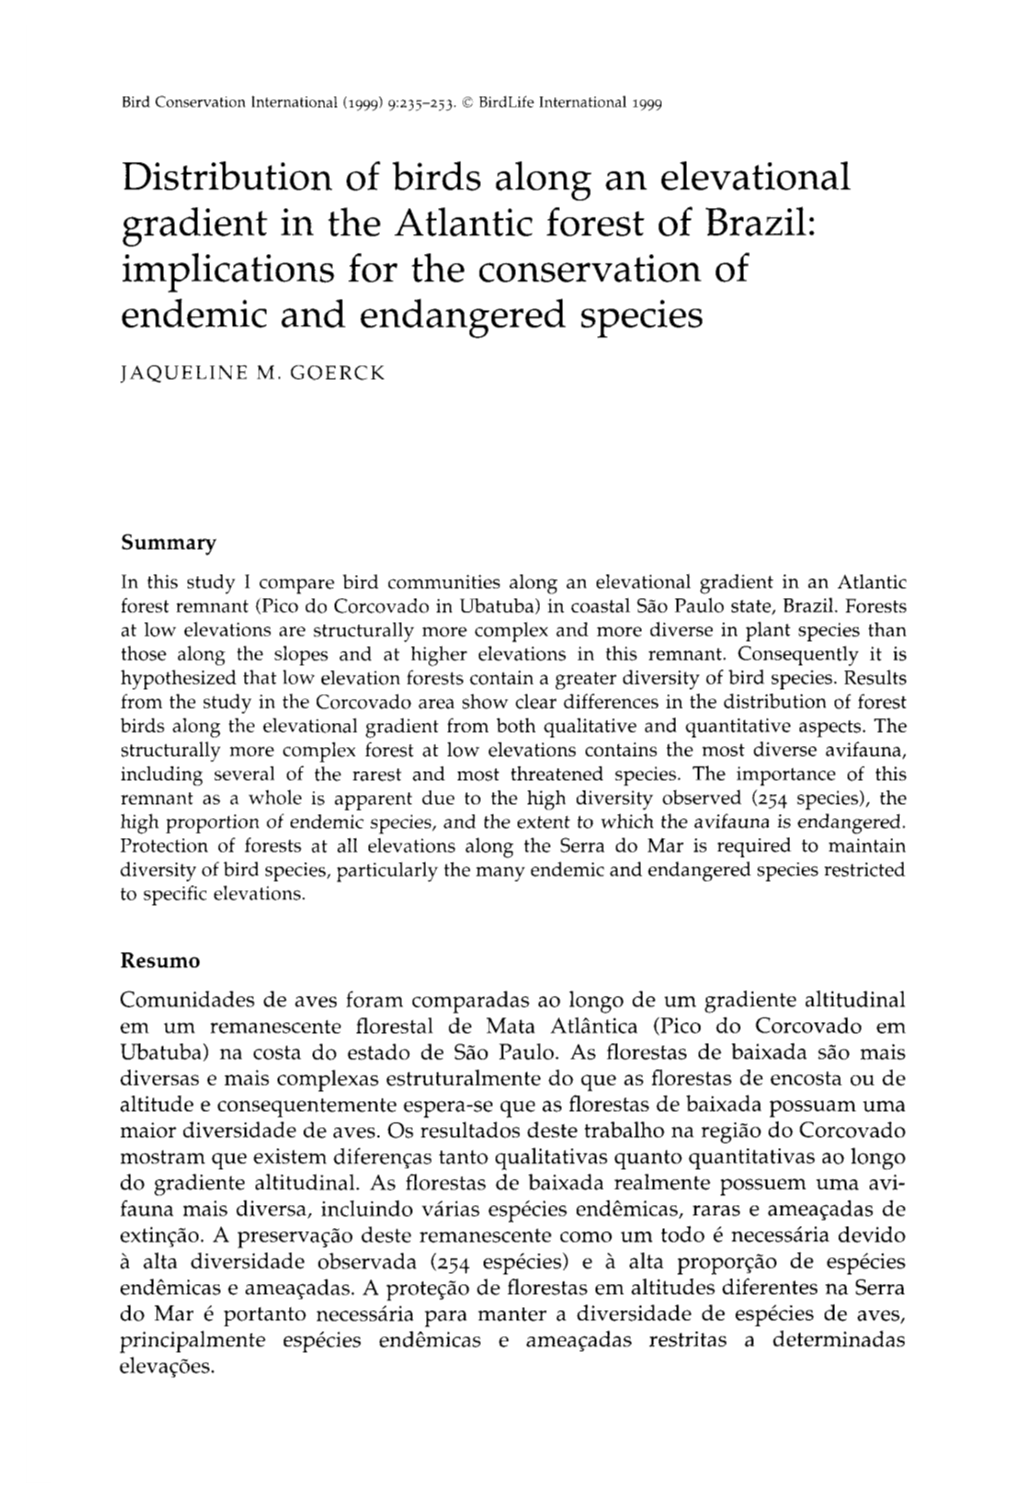 Distribution of Birds Along an Elevational Gradient in the Atlantic Forest of Brazil: Implications for the Conservation of Endemic and Endangered Species